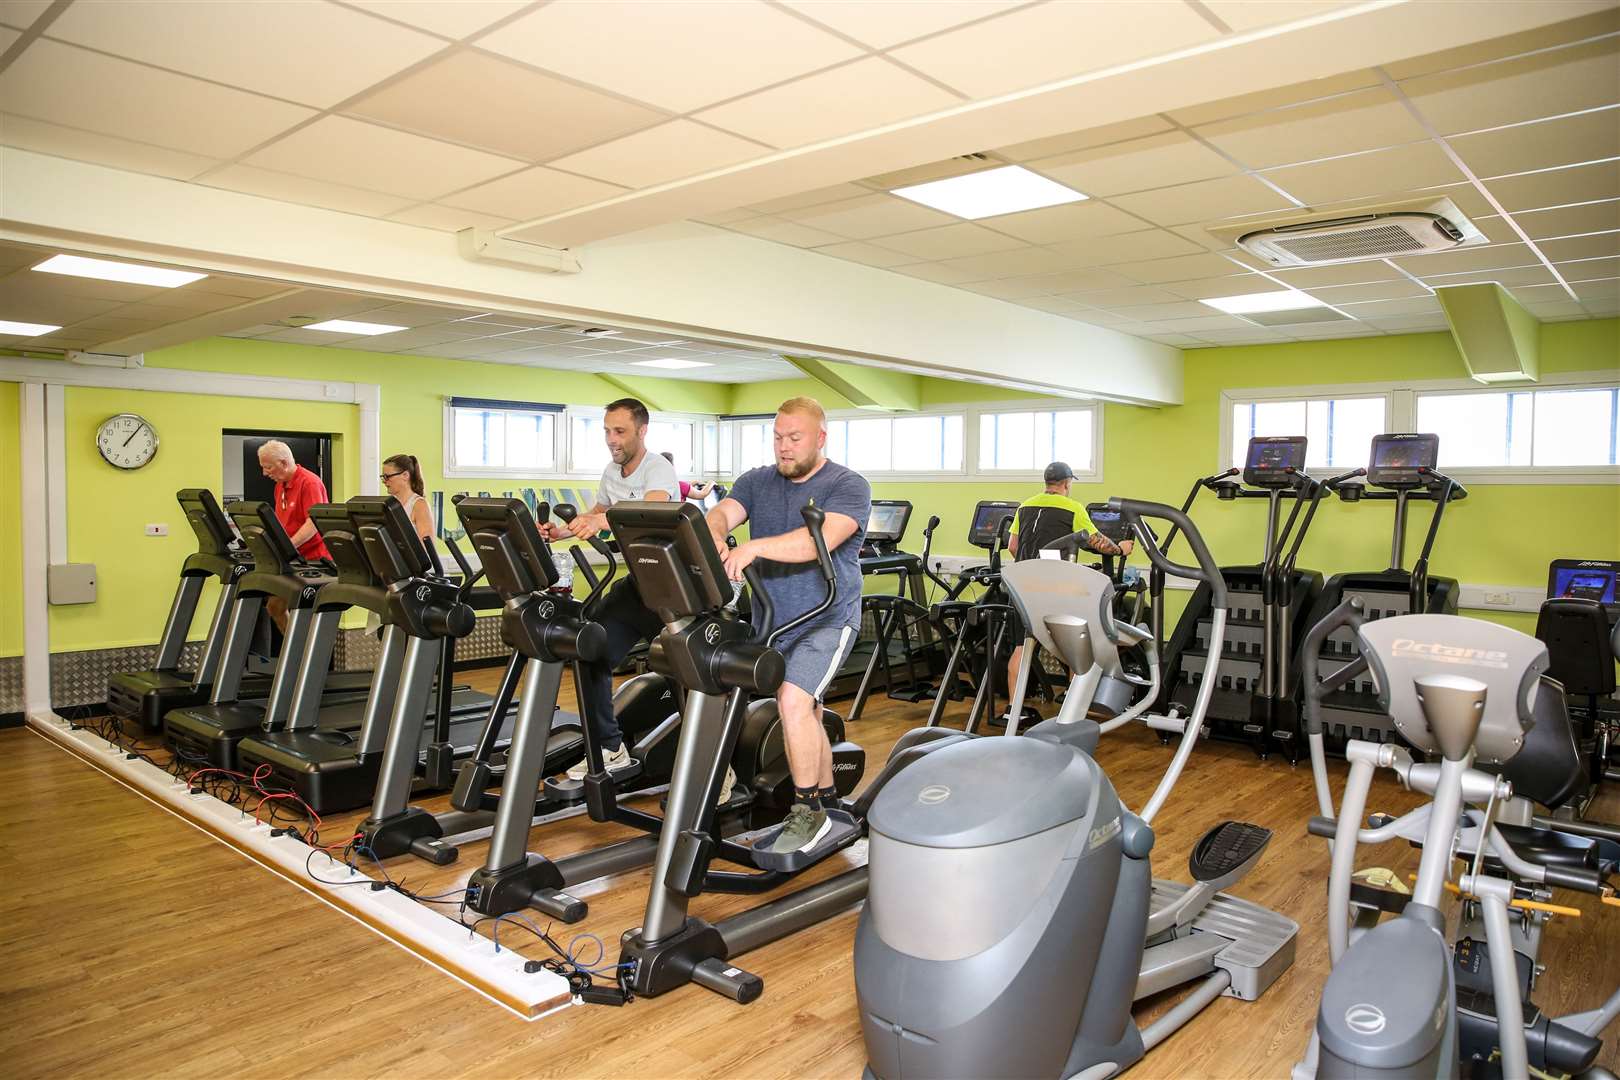 Barry Penman and Aston Grimwood in the cardio room at Sheppey Leisure Complex